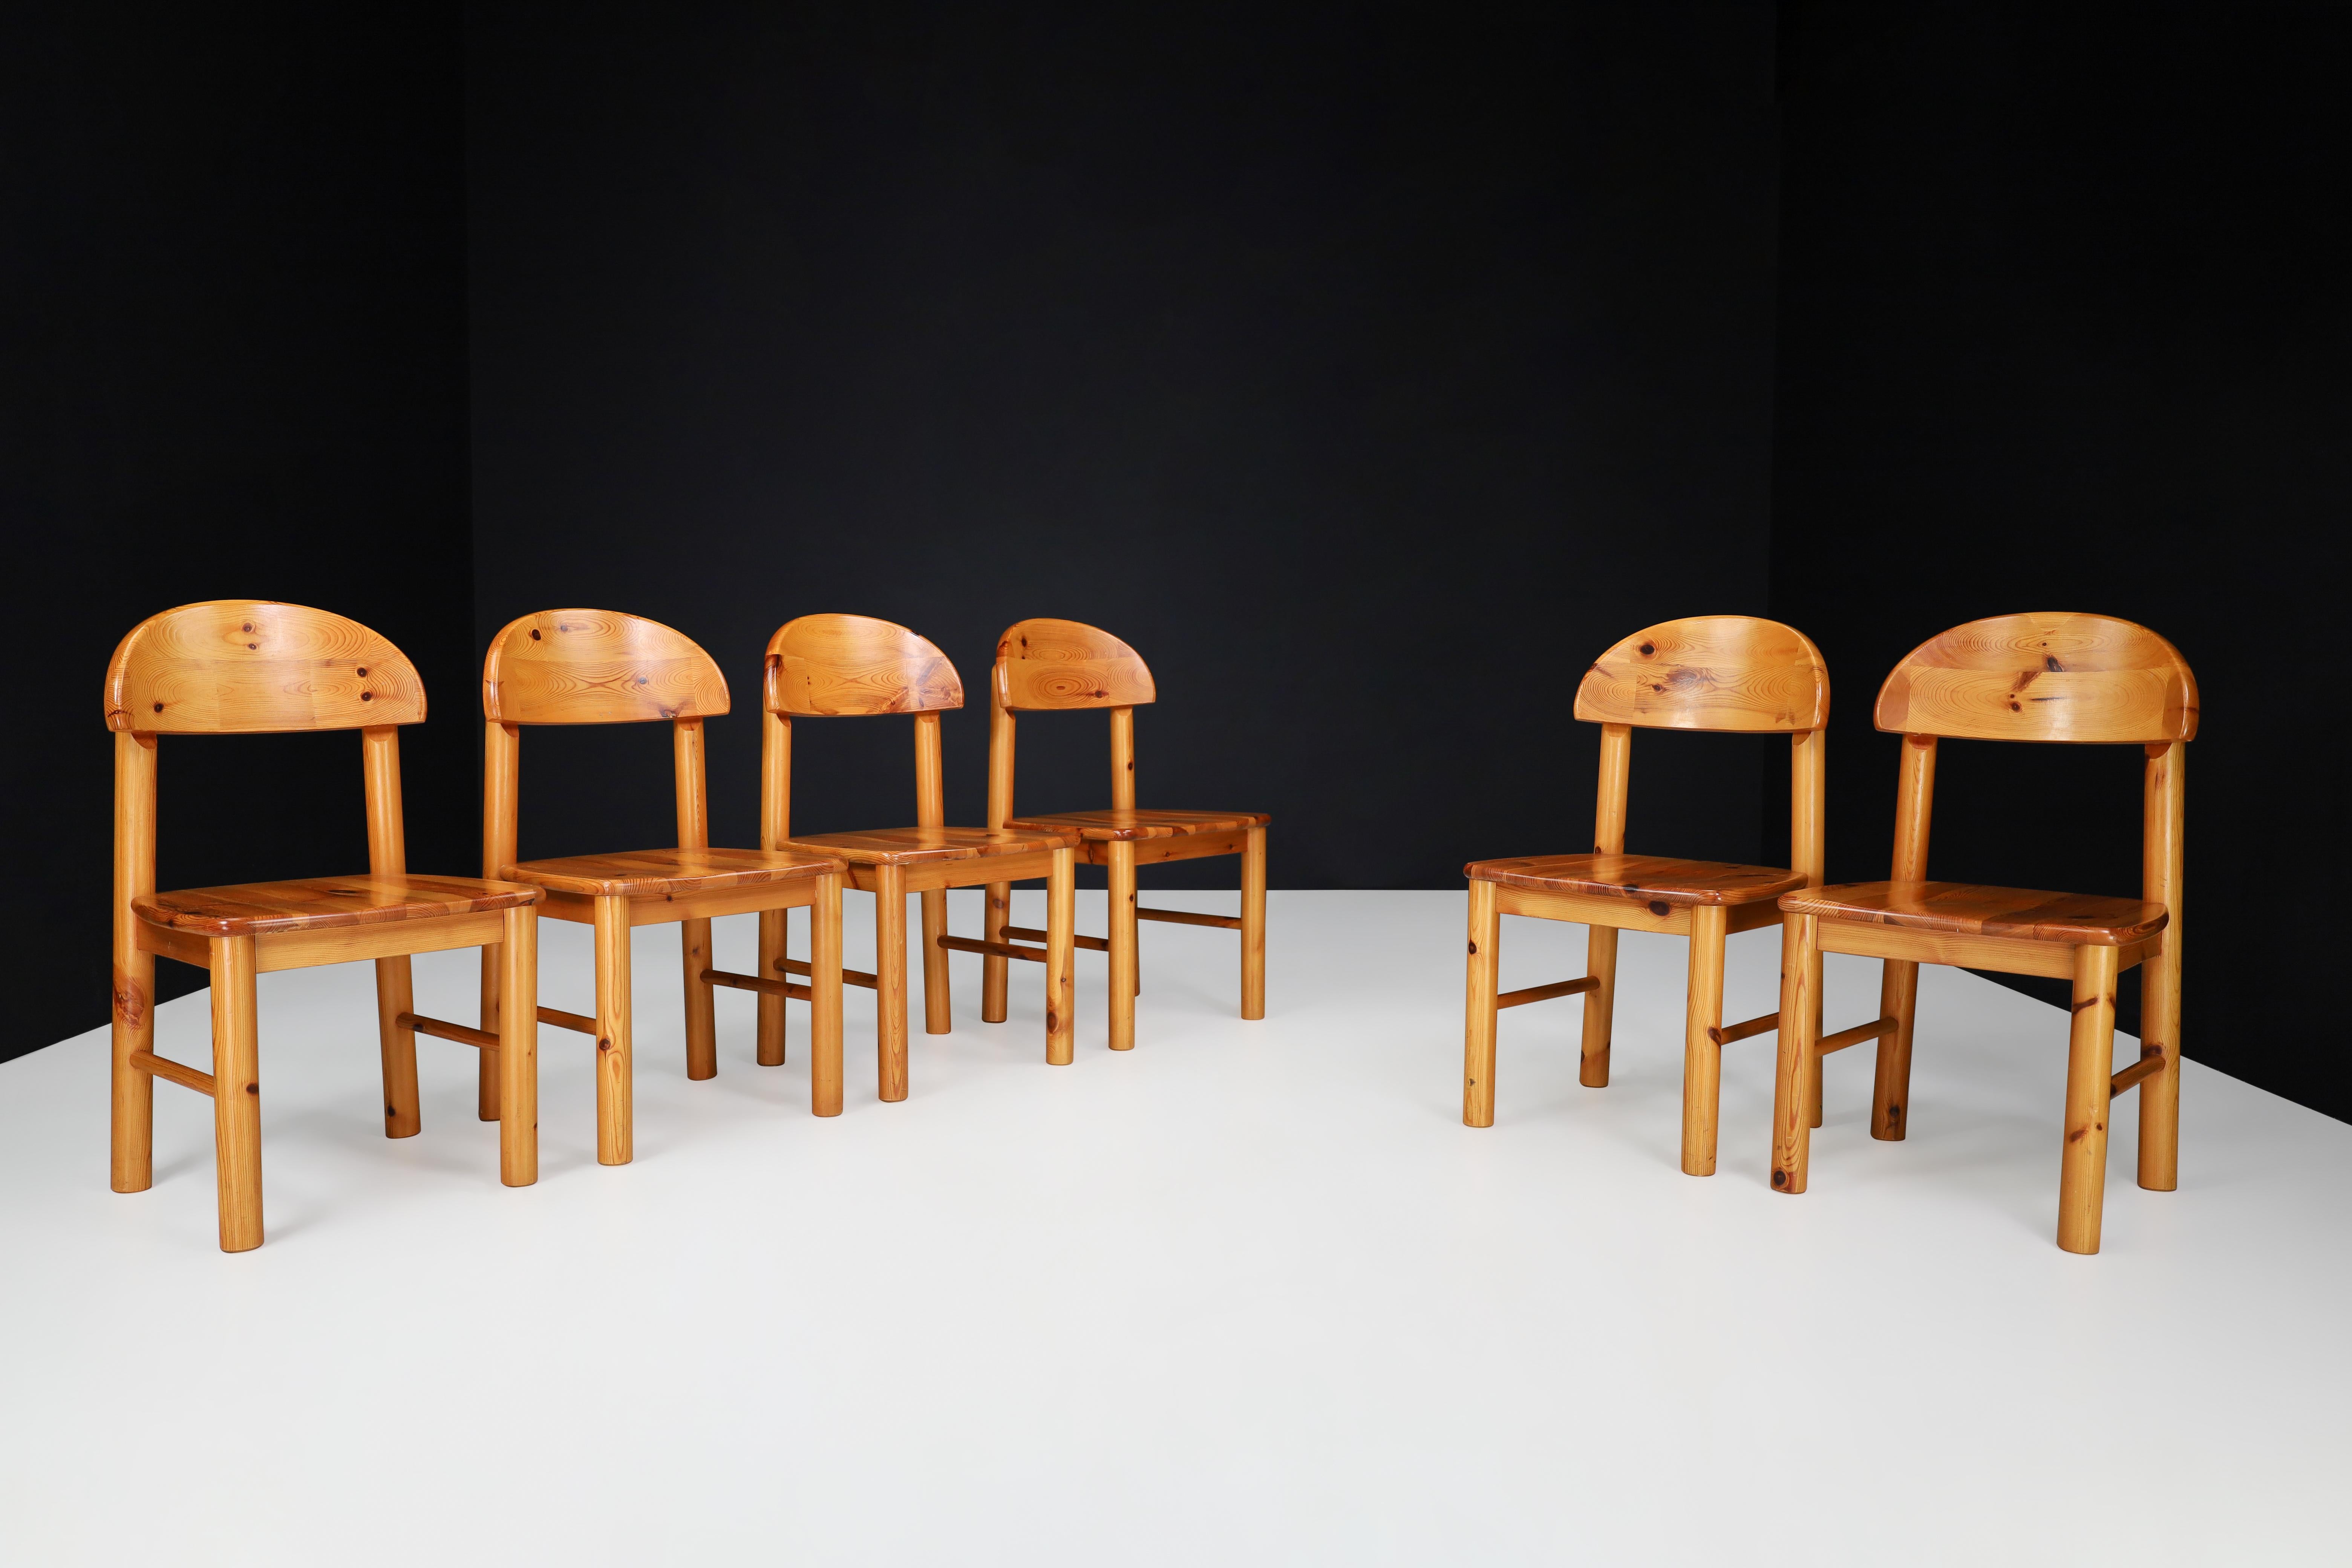 Rainer Daumiller Set of Six Dining Chairs in Pine, Denmark 1970s

The dining chairs in question were designed by Rainer Daumiller during the 1970s and produced by Hirtshals Savværk. They boast a seat and backrest made of rustic pine wood, lending